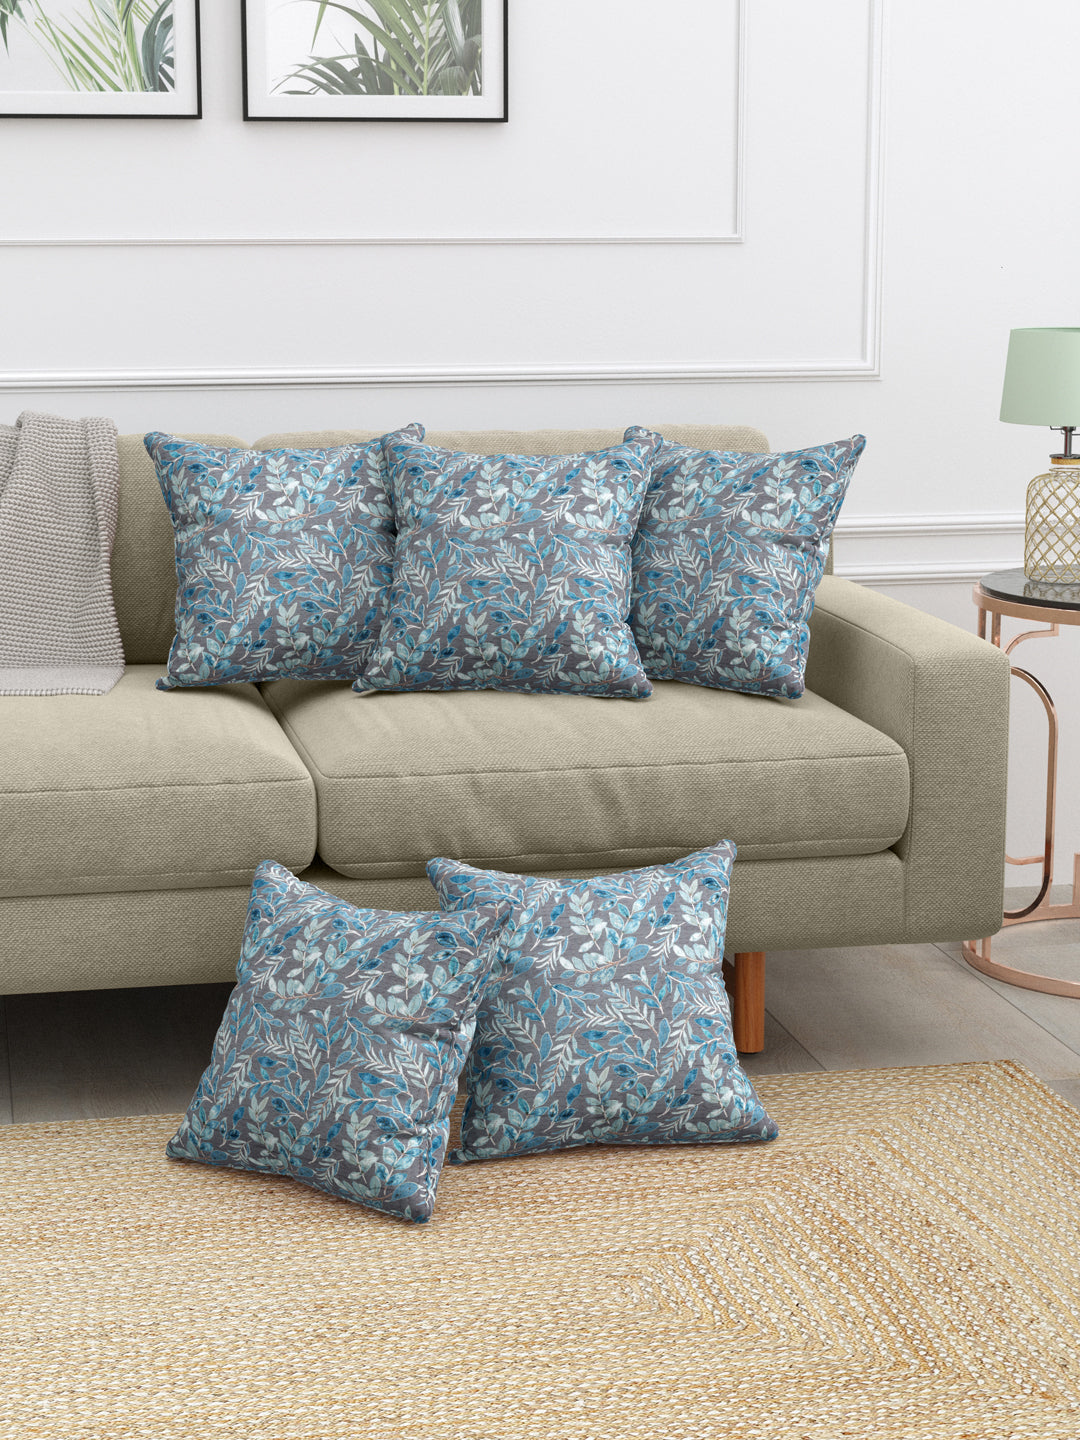 Cotton Cushion Covers; 16x16 Inches; Set of 5; Blue Leaves